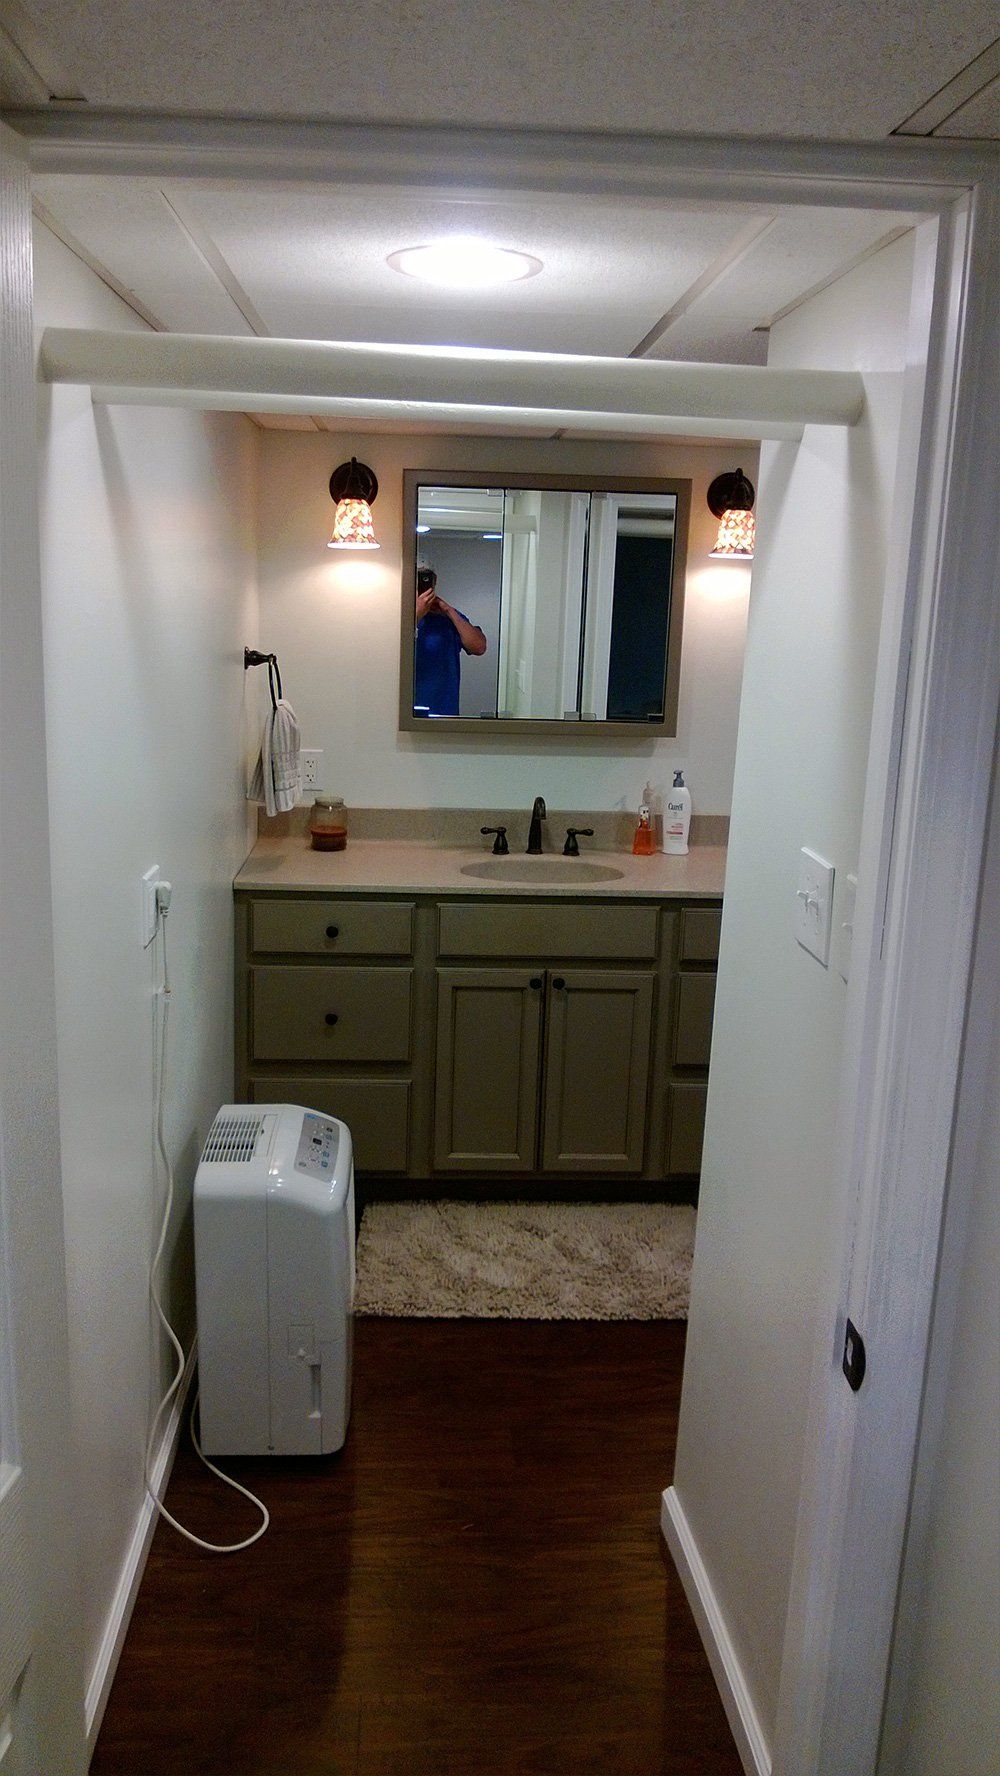 Bathroom remodeled -  Remodeling Services in Slippery Rock, PA